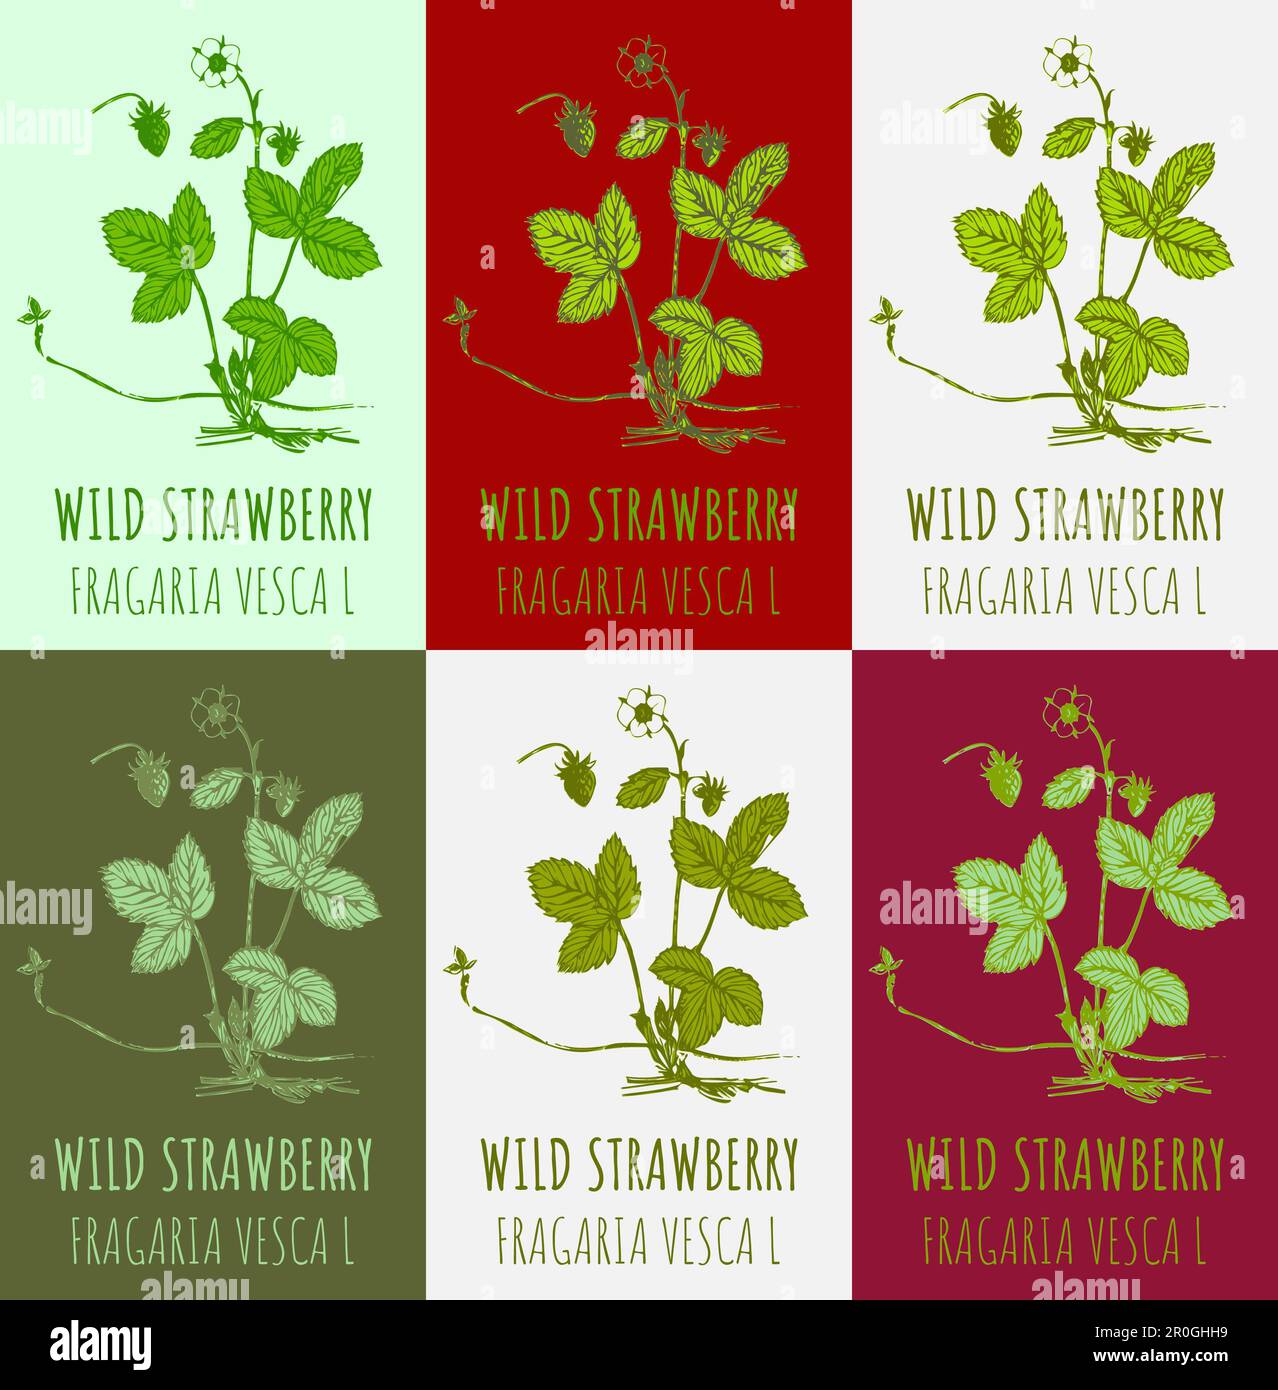 Set of vector drawing of WILD STRAWBERRY in various colors. Hand drawn illustration. Latin name FRAGARIA VESCA L. Stock Photo